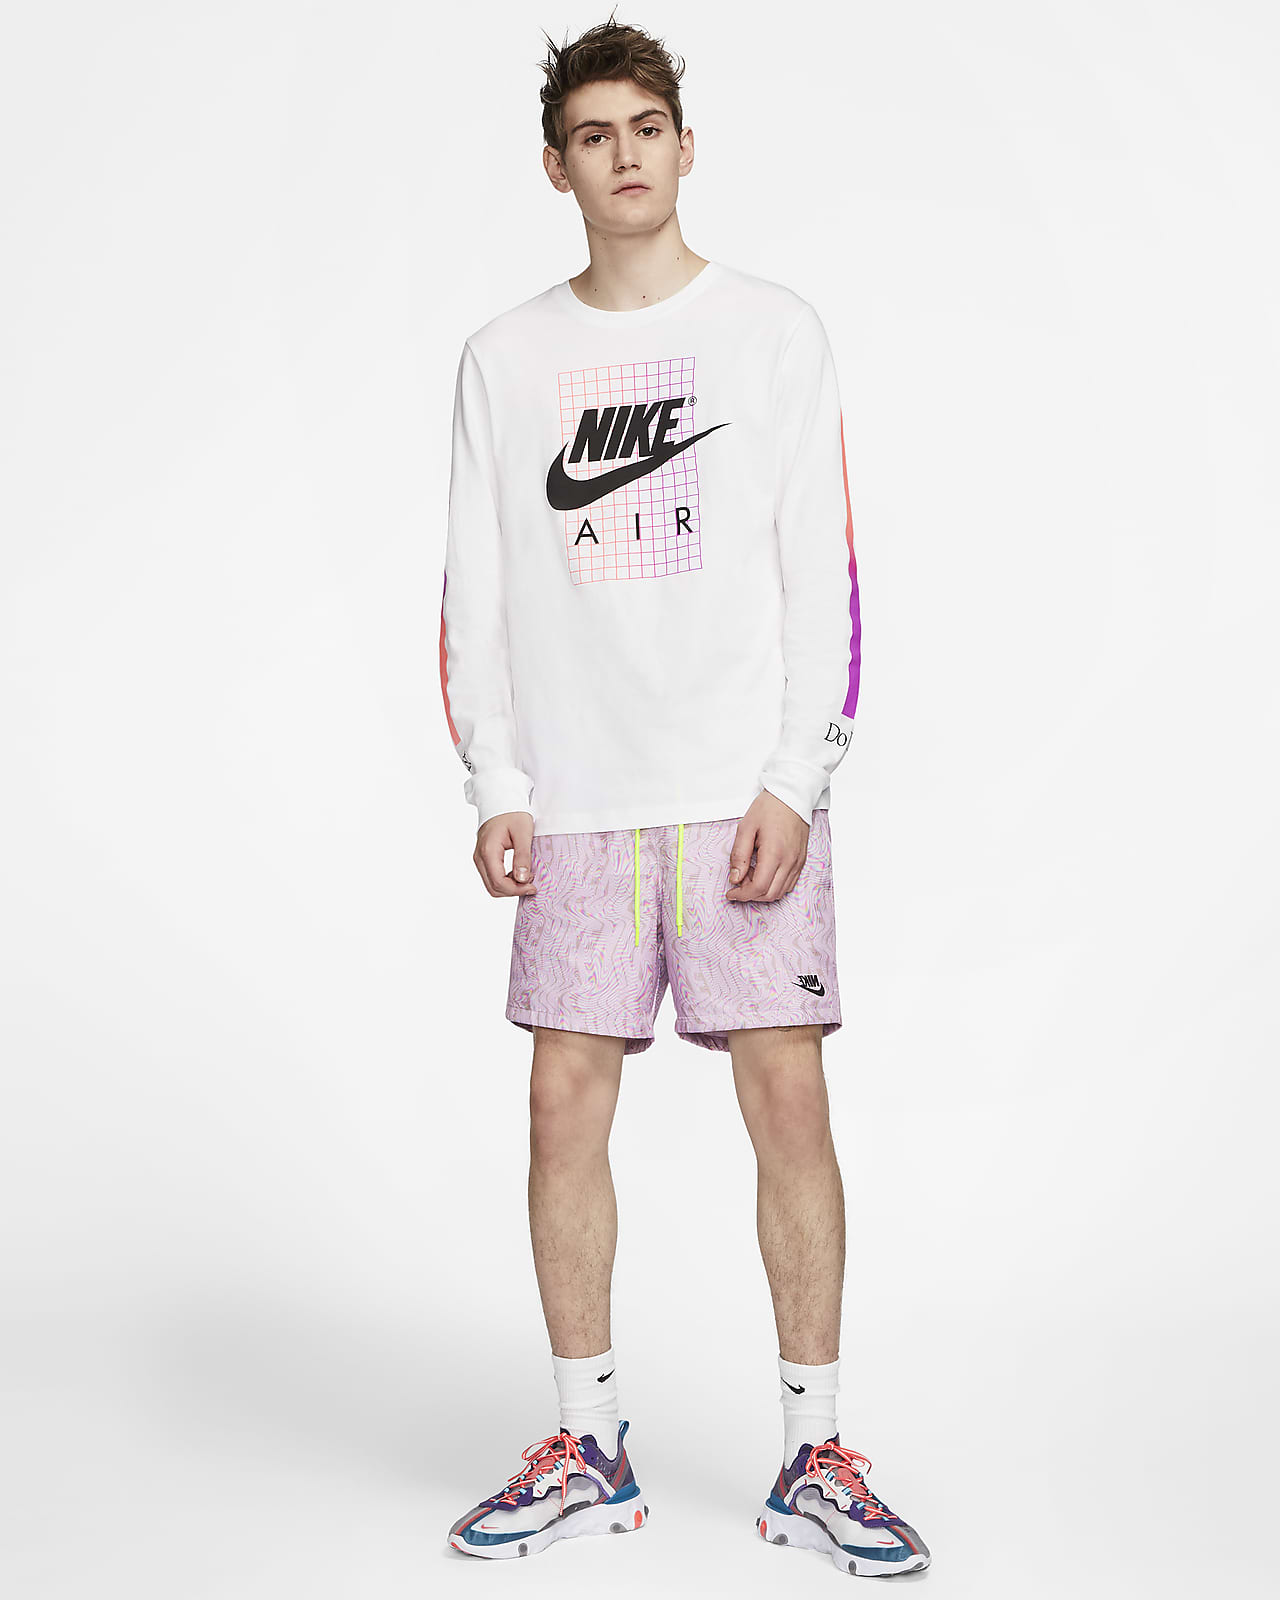 nike festival collection